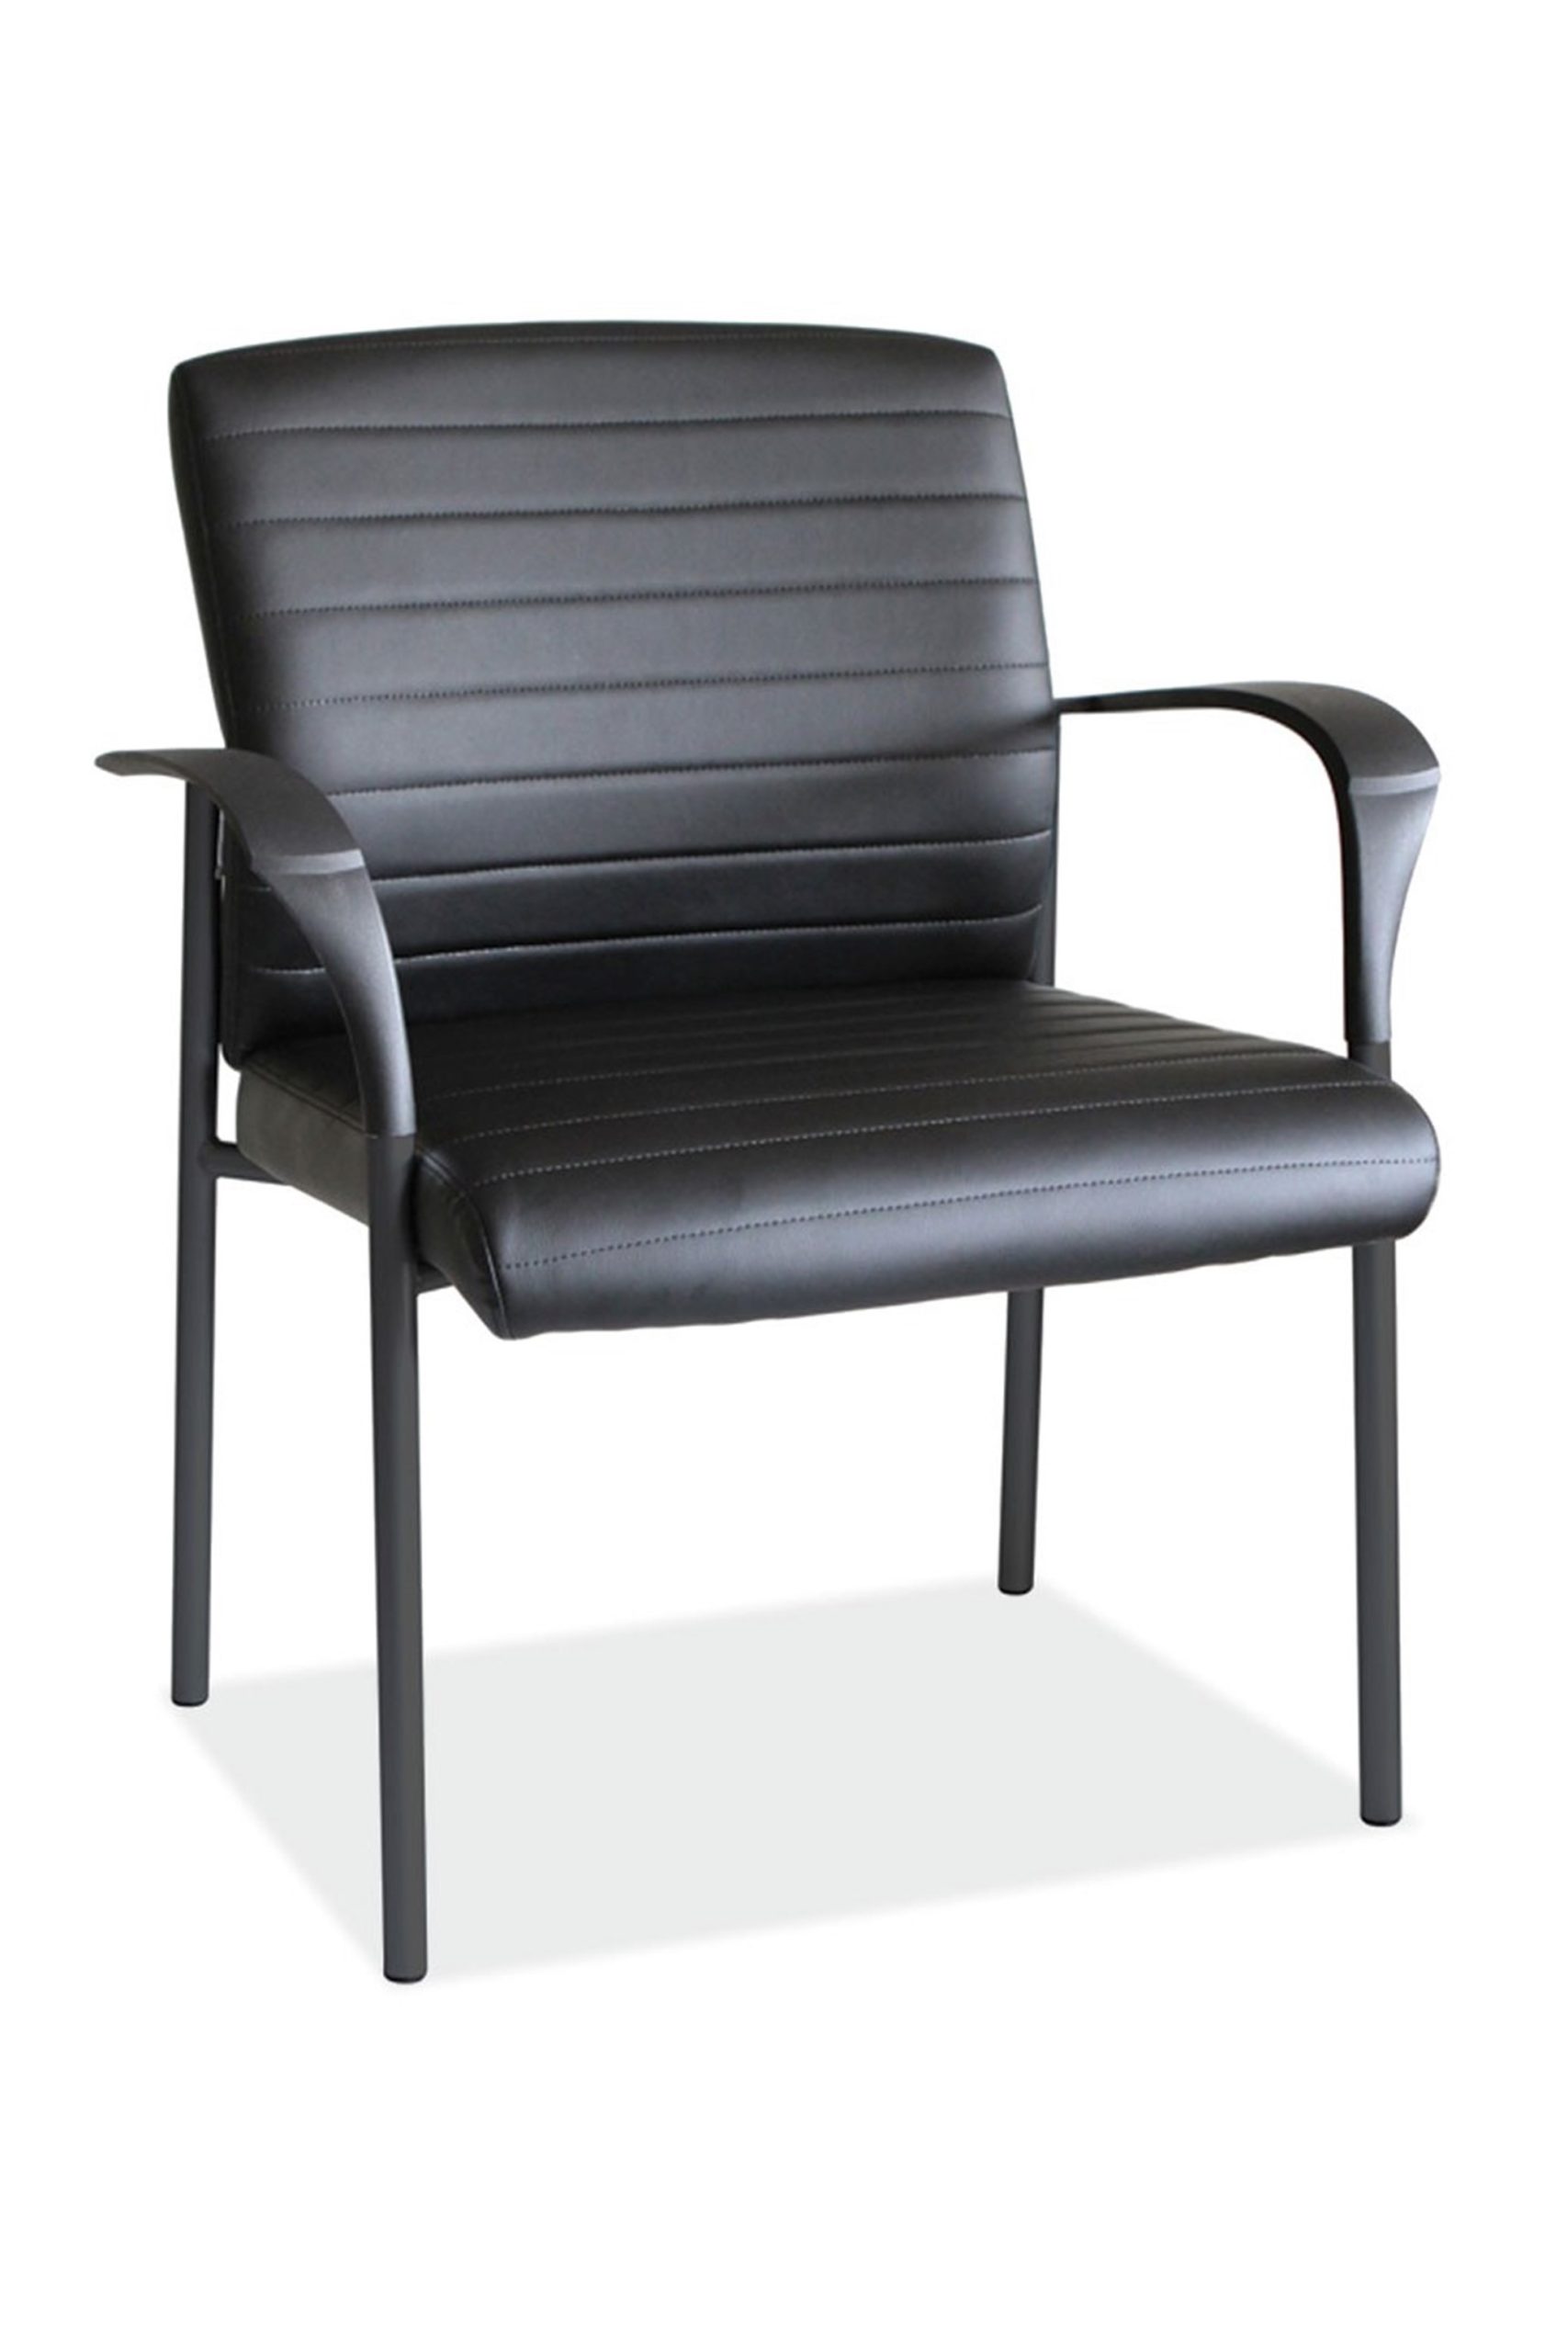 Guest armchair with black PVC loop arms, black vinyl seat and back, water seat cushion, and stylish horizontal stitching detail.